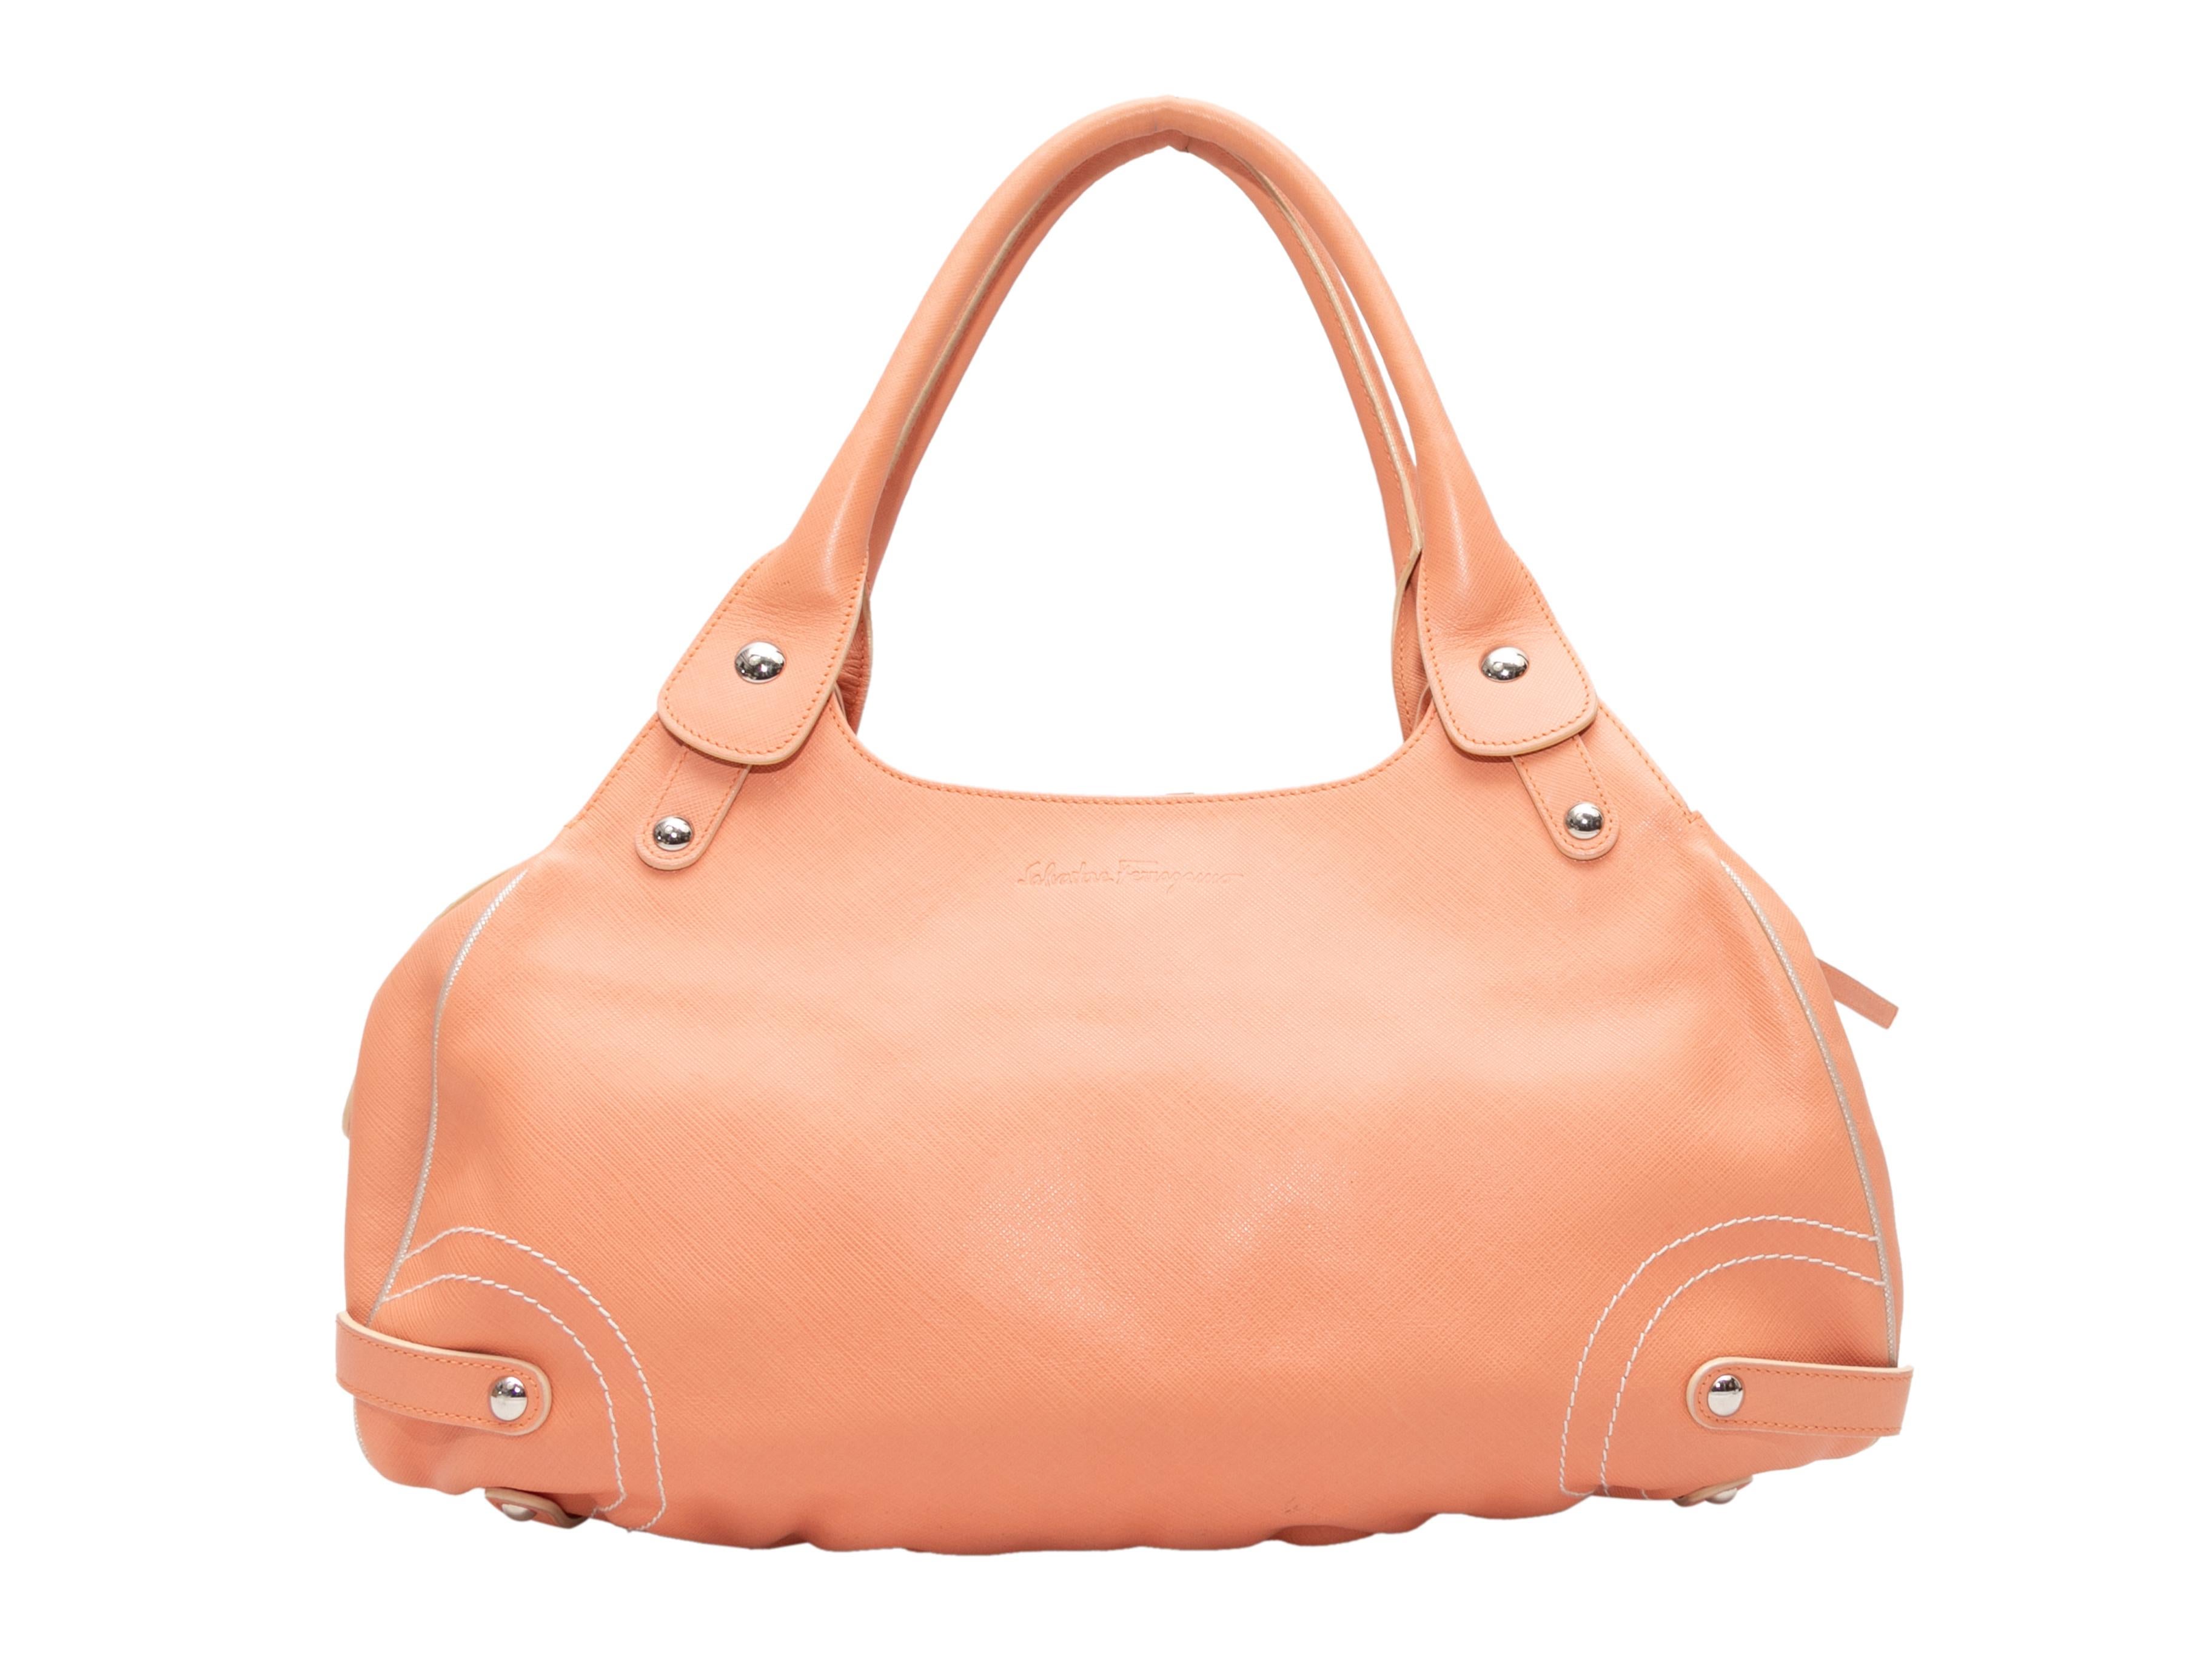 Peach Salvatore Ferragamo Shoulder Bag. This shoulder bag features a leather body, silver-tone hardware, a front Gancini buckle accent, dual rolled top handles, and a top zip closure. 16